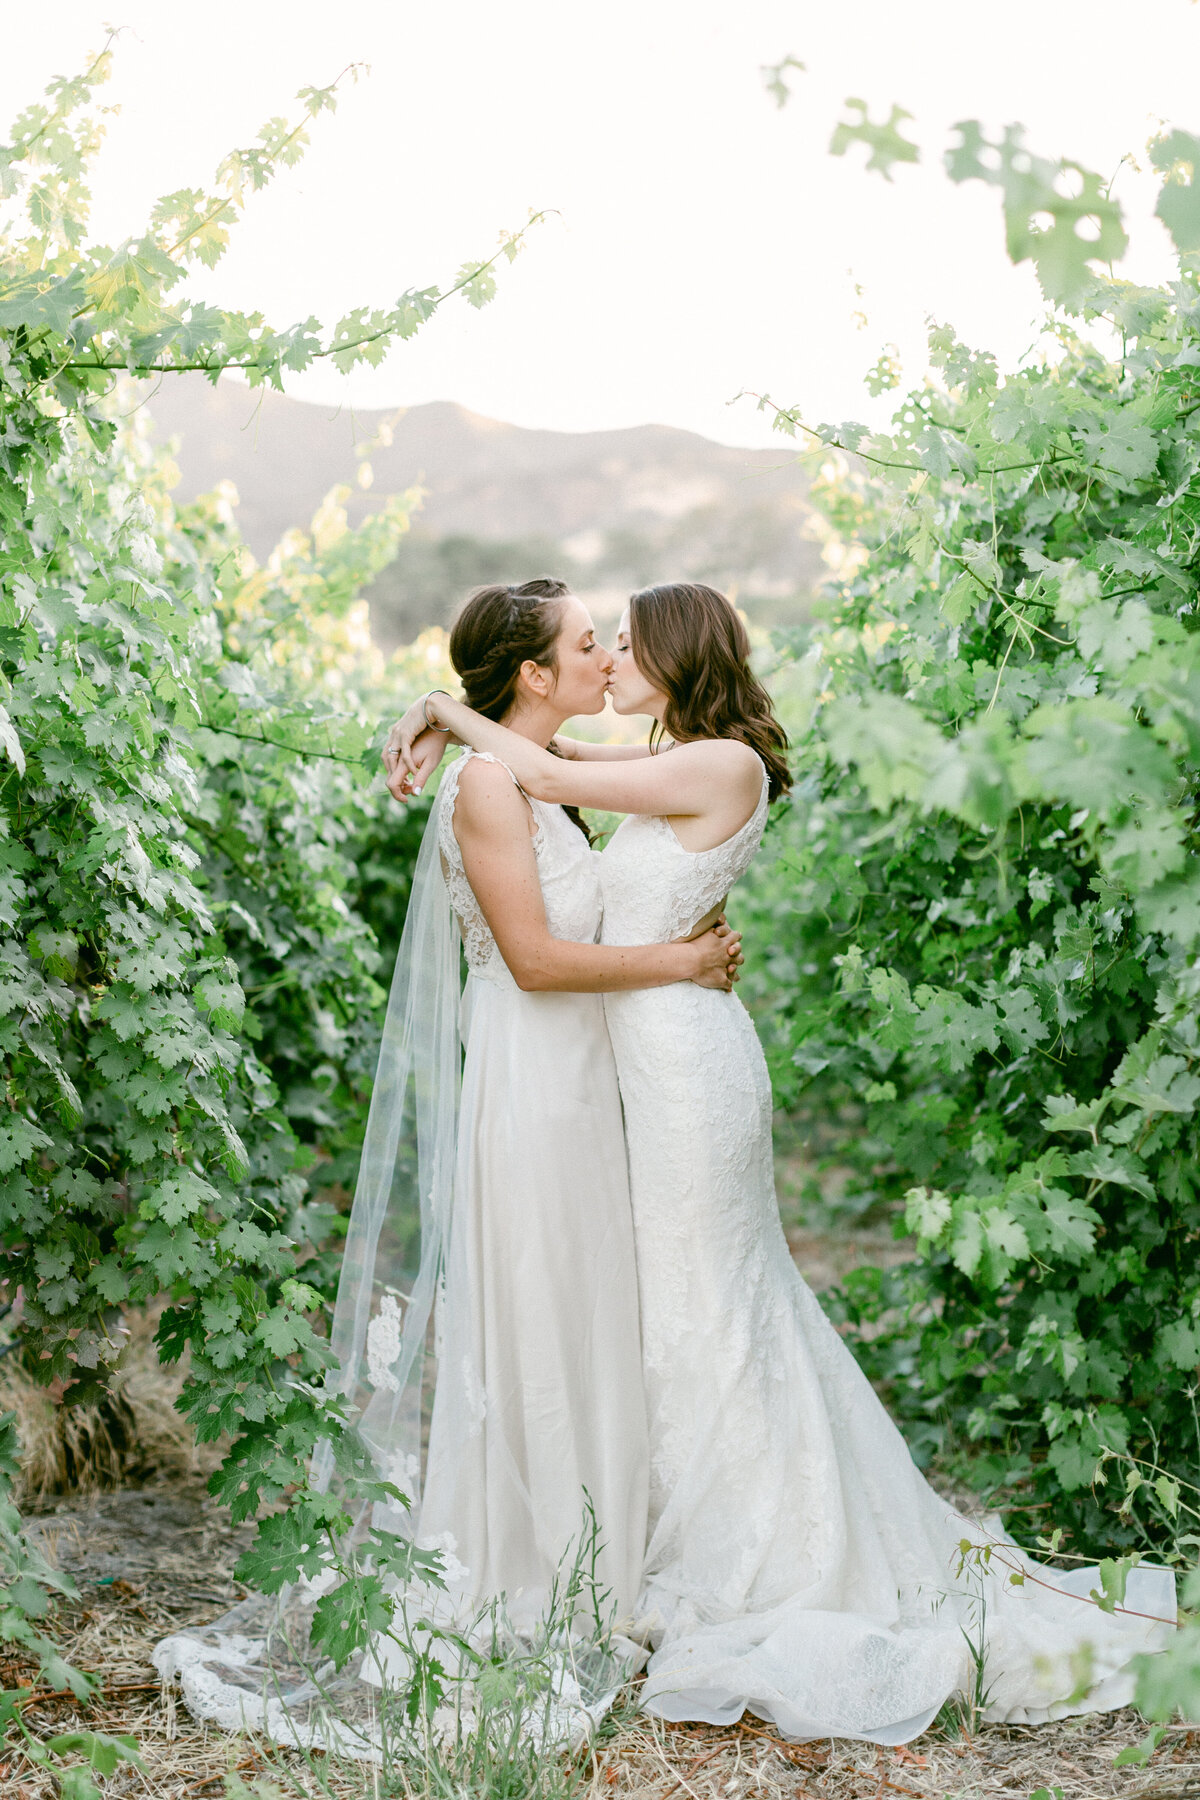 Lesbian couple kiss in their wedding gowns in a vineyard on their wedding day